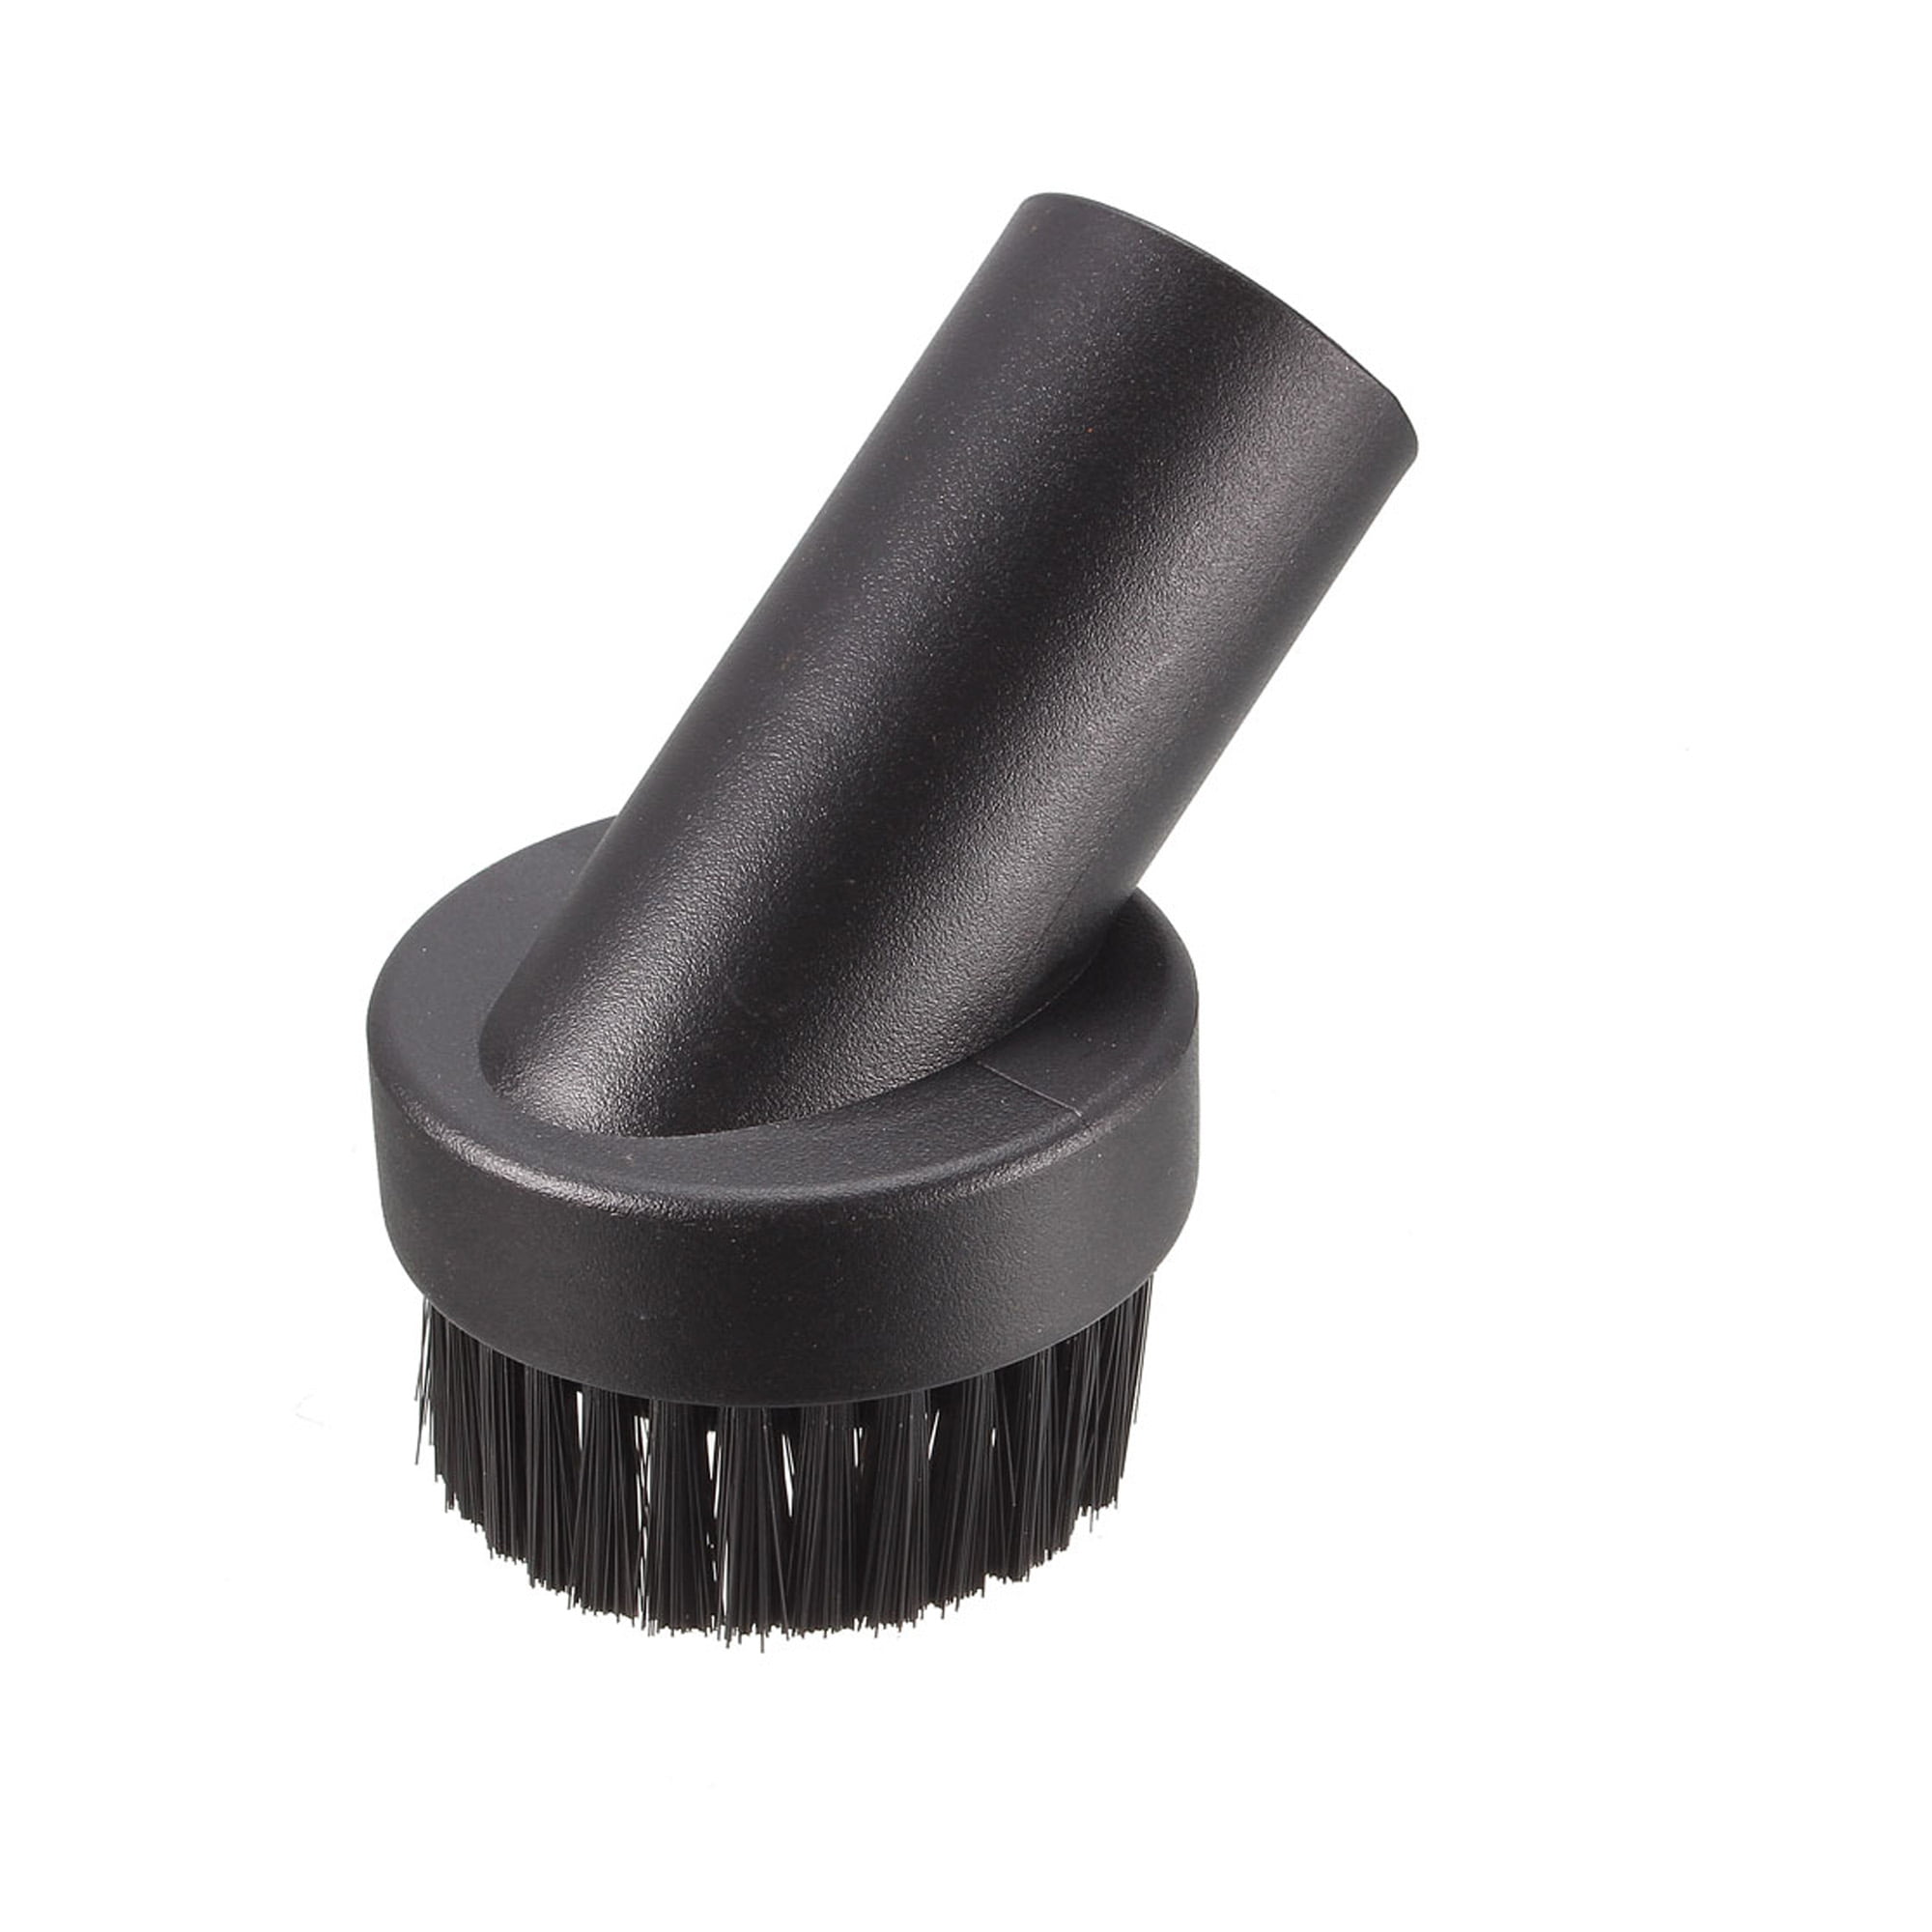 1x Round Vacuum Cleaner Brush Head Dusting Crevice Dust Collector 32mm Black Hot